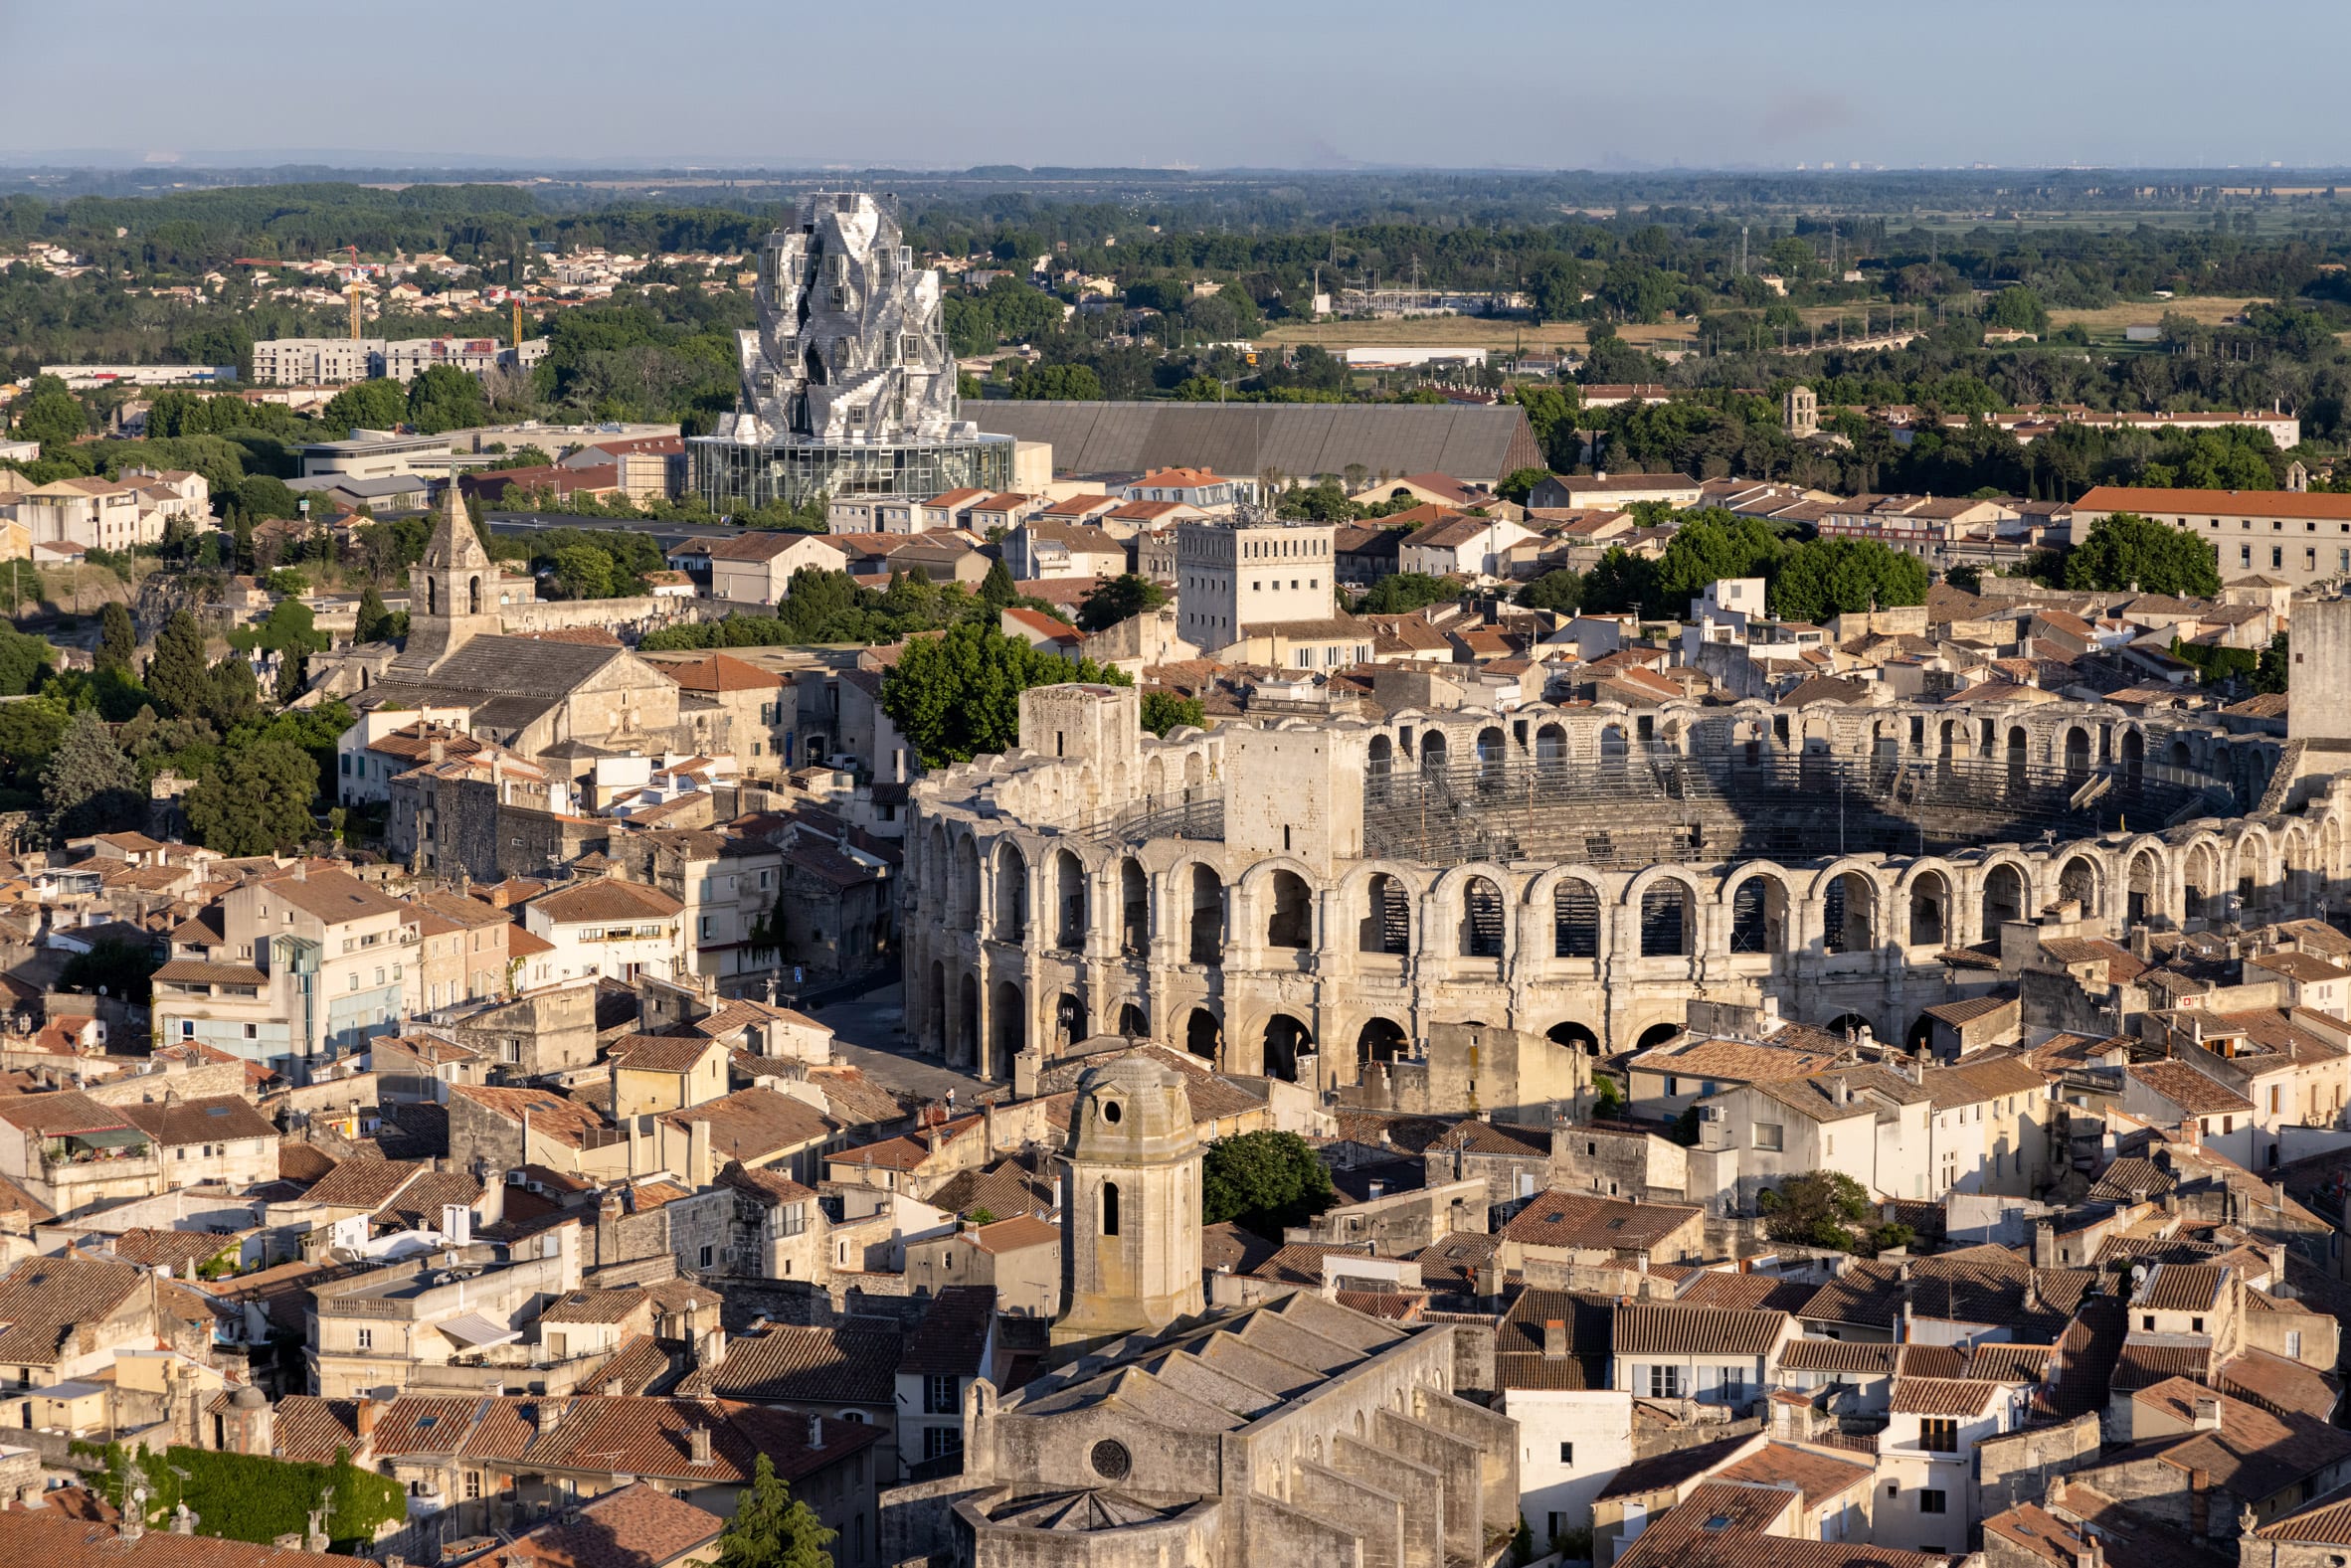 The Tower in Arles